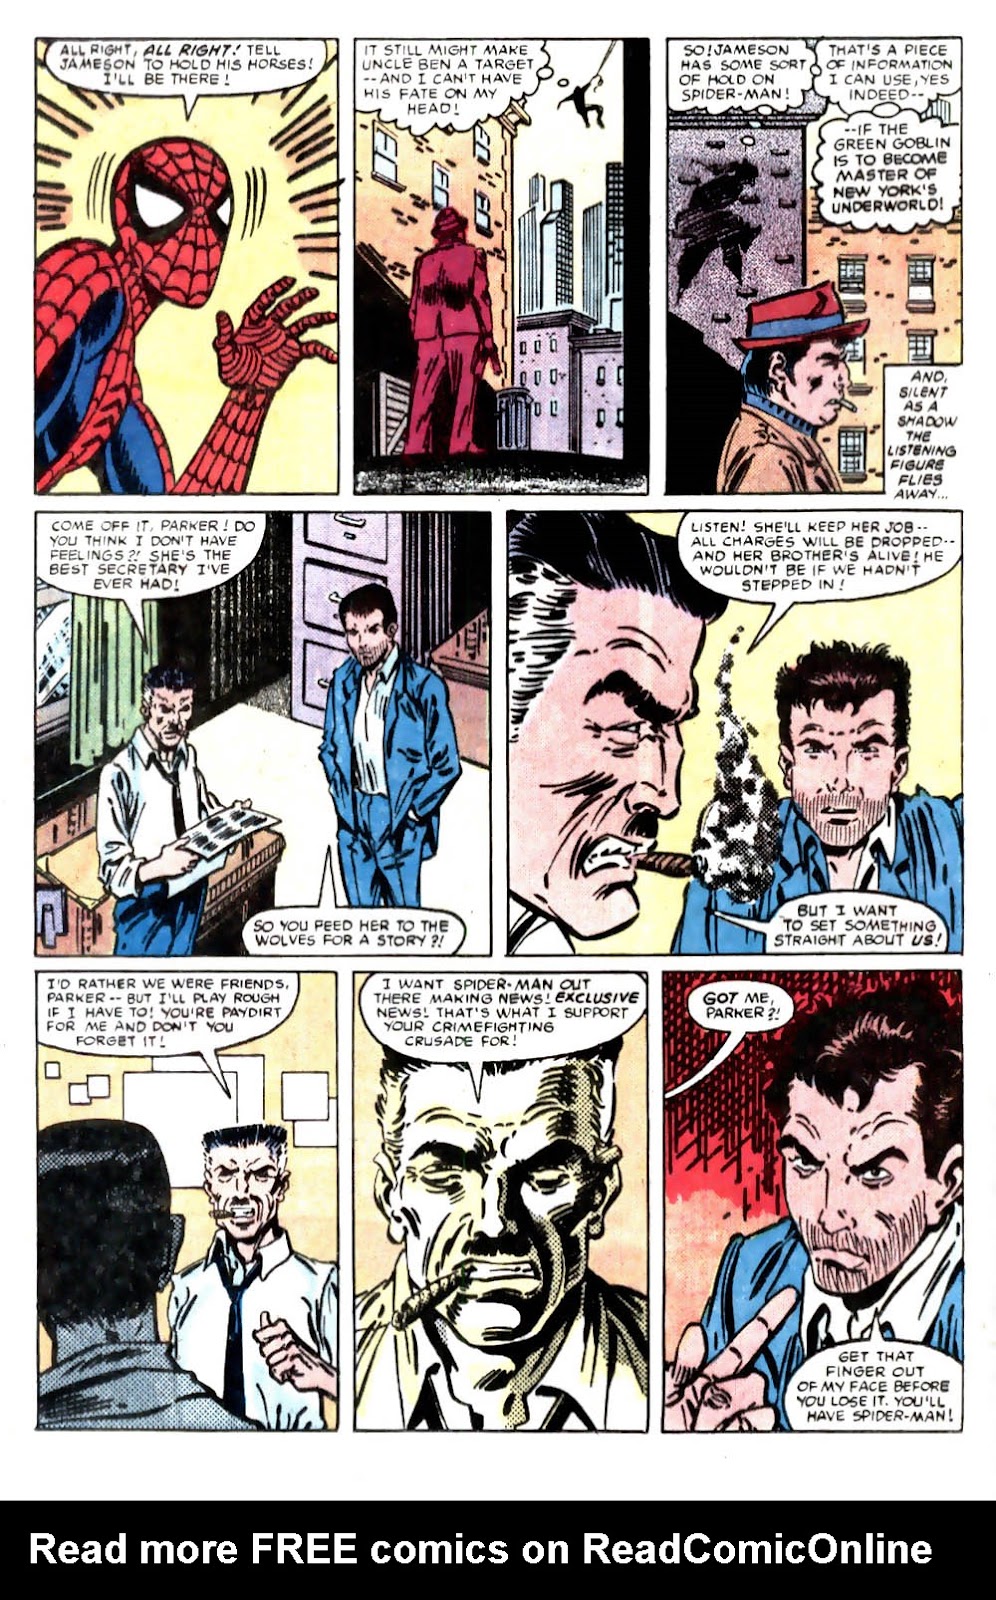 What If? (1977) issue 46 - Spiderman's uncle ben had lived - Page 31